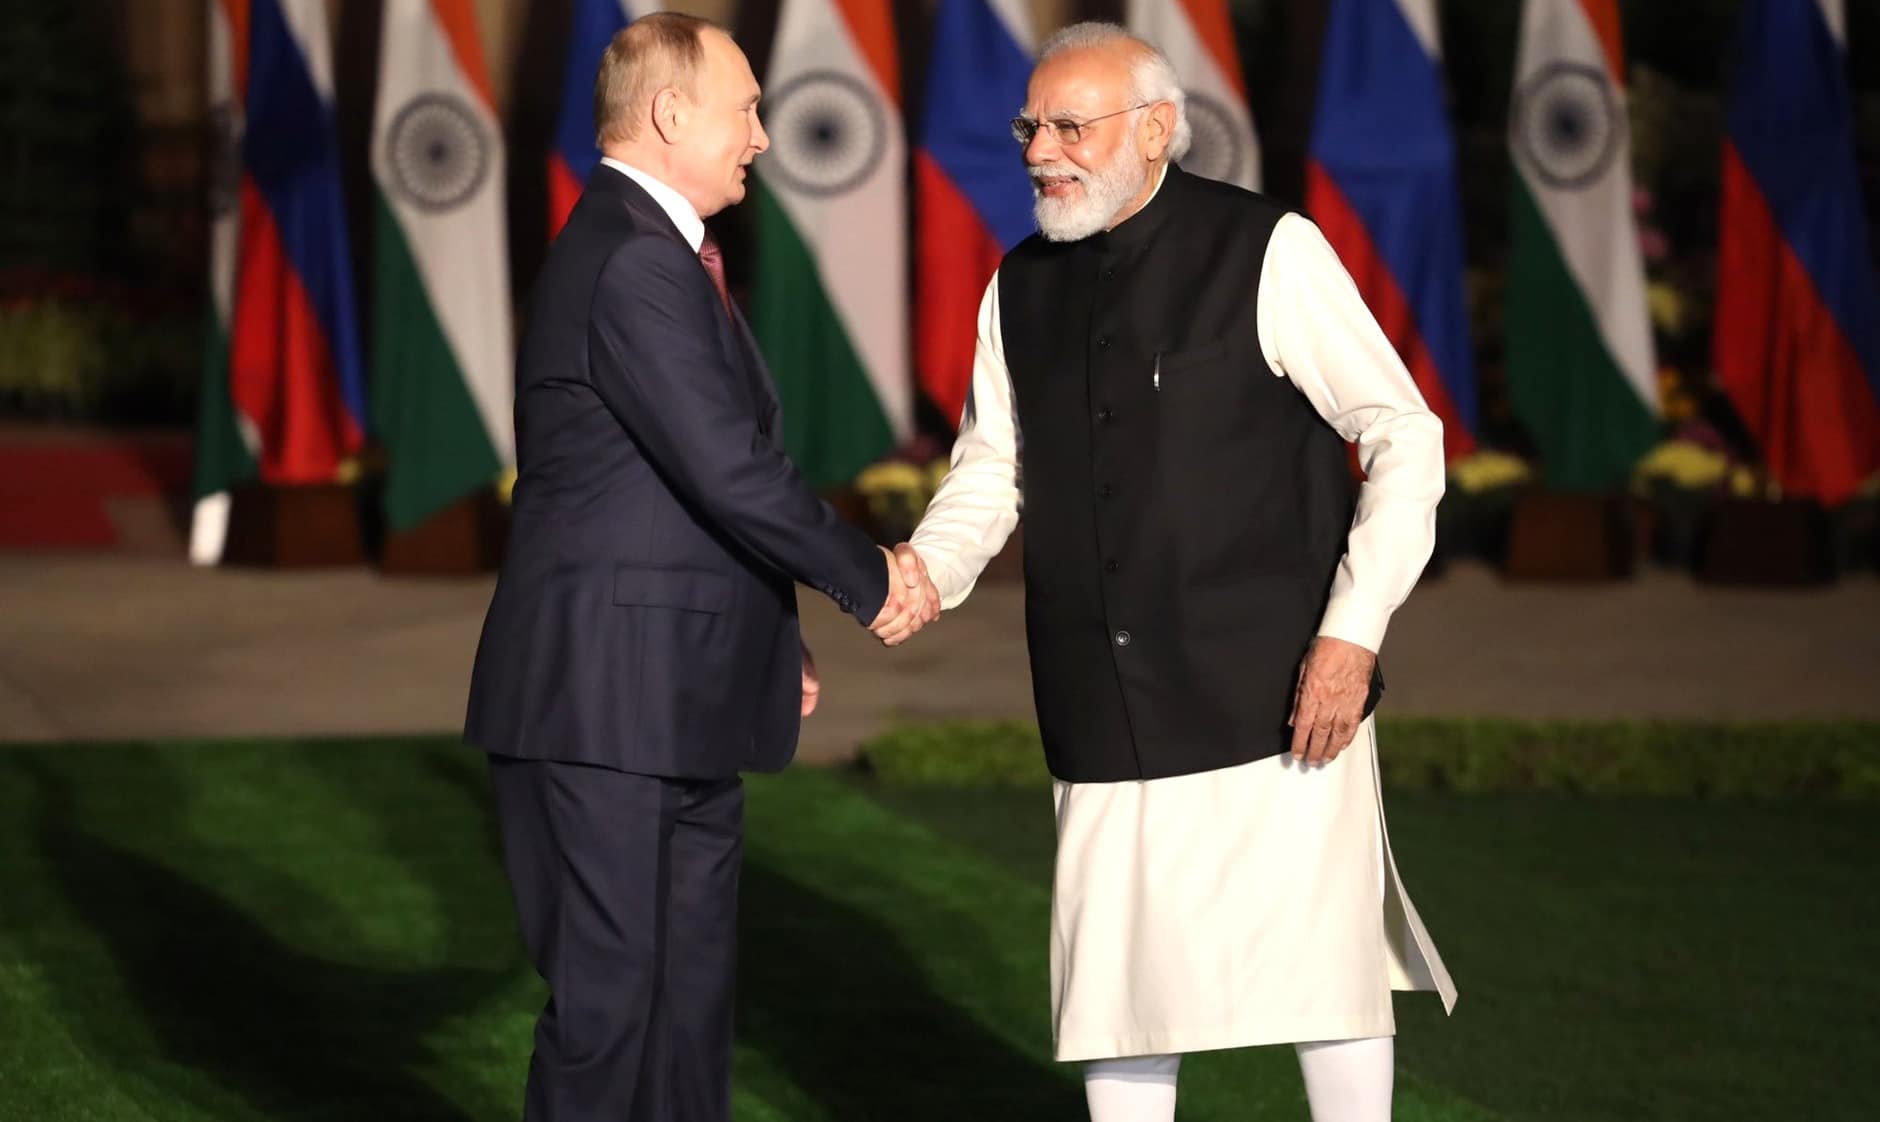 Vladimir Putin greeting Narendra Modi by handshake with Russian and Indian flags in the background